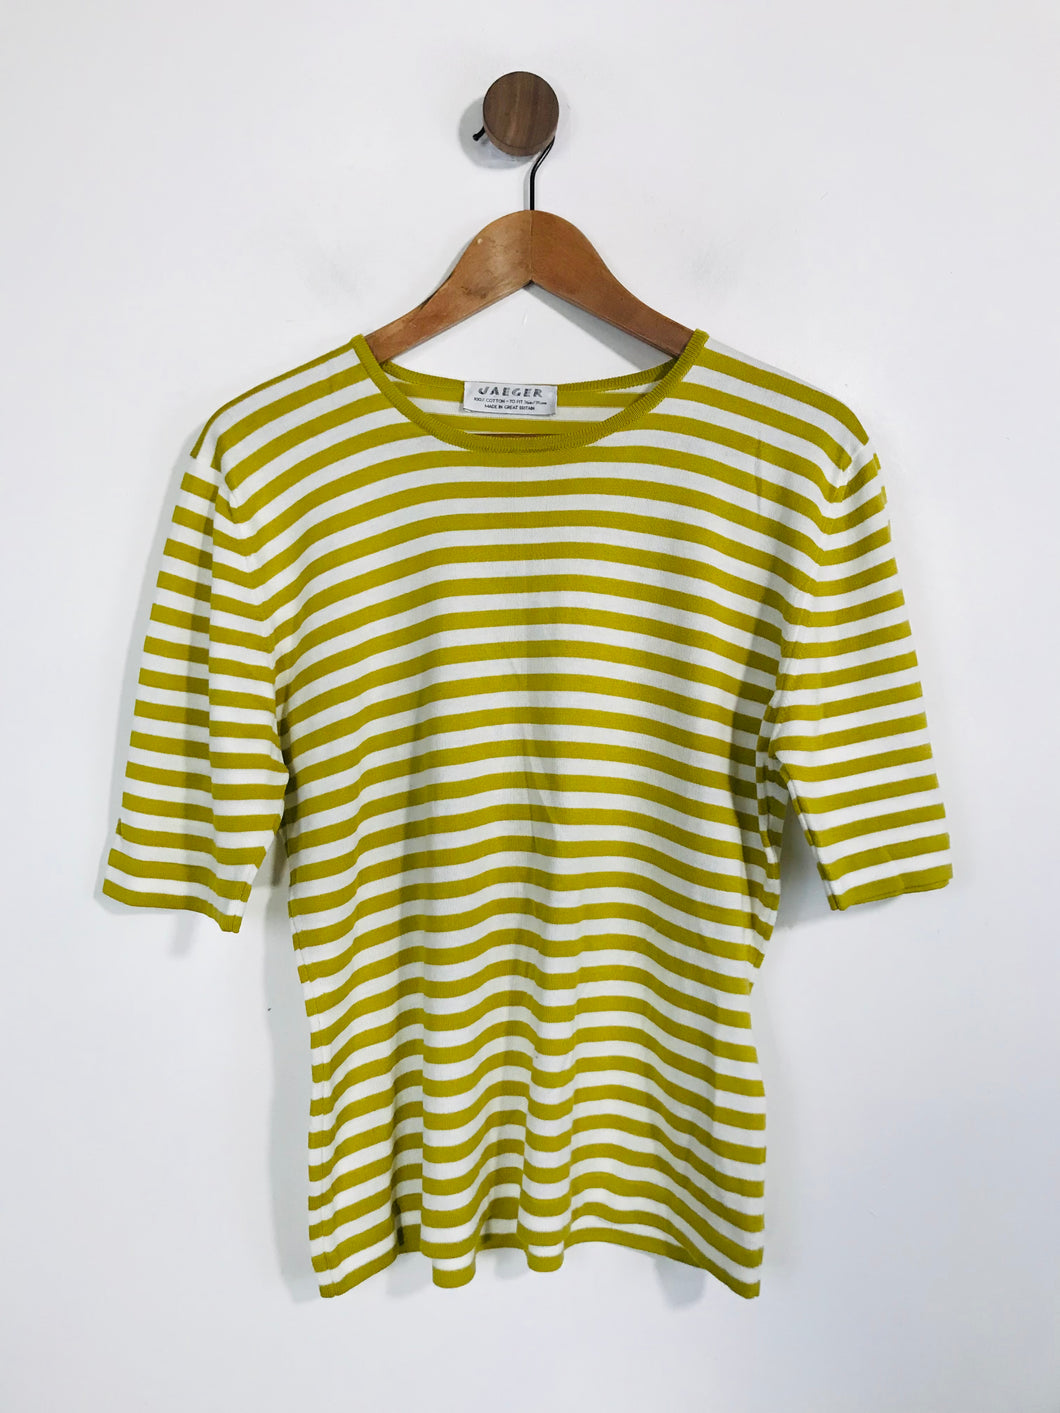 Jaeger Women's Cotton Striped T-Shirt | 36in | Yellow